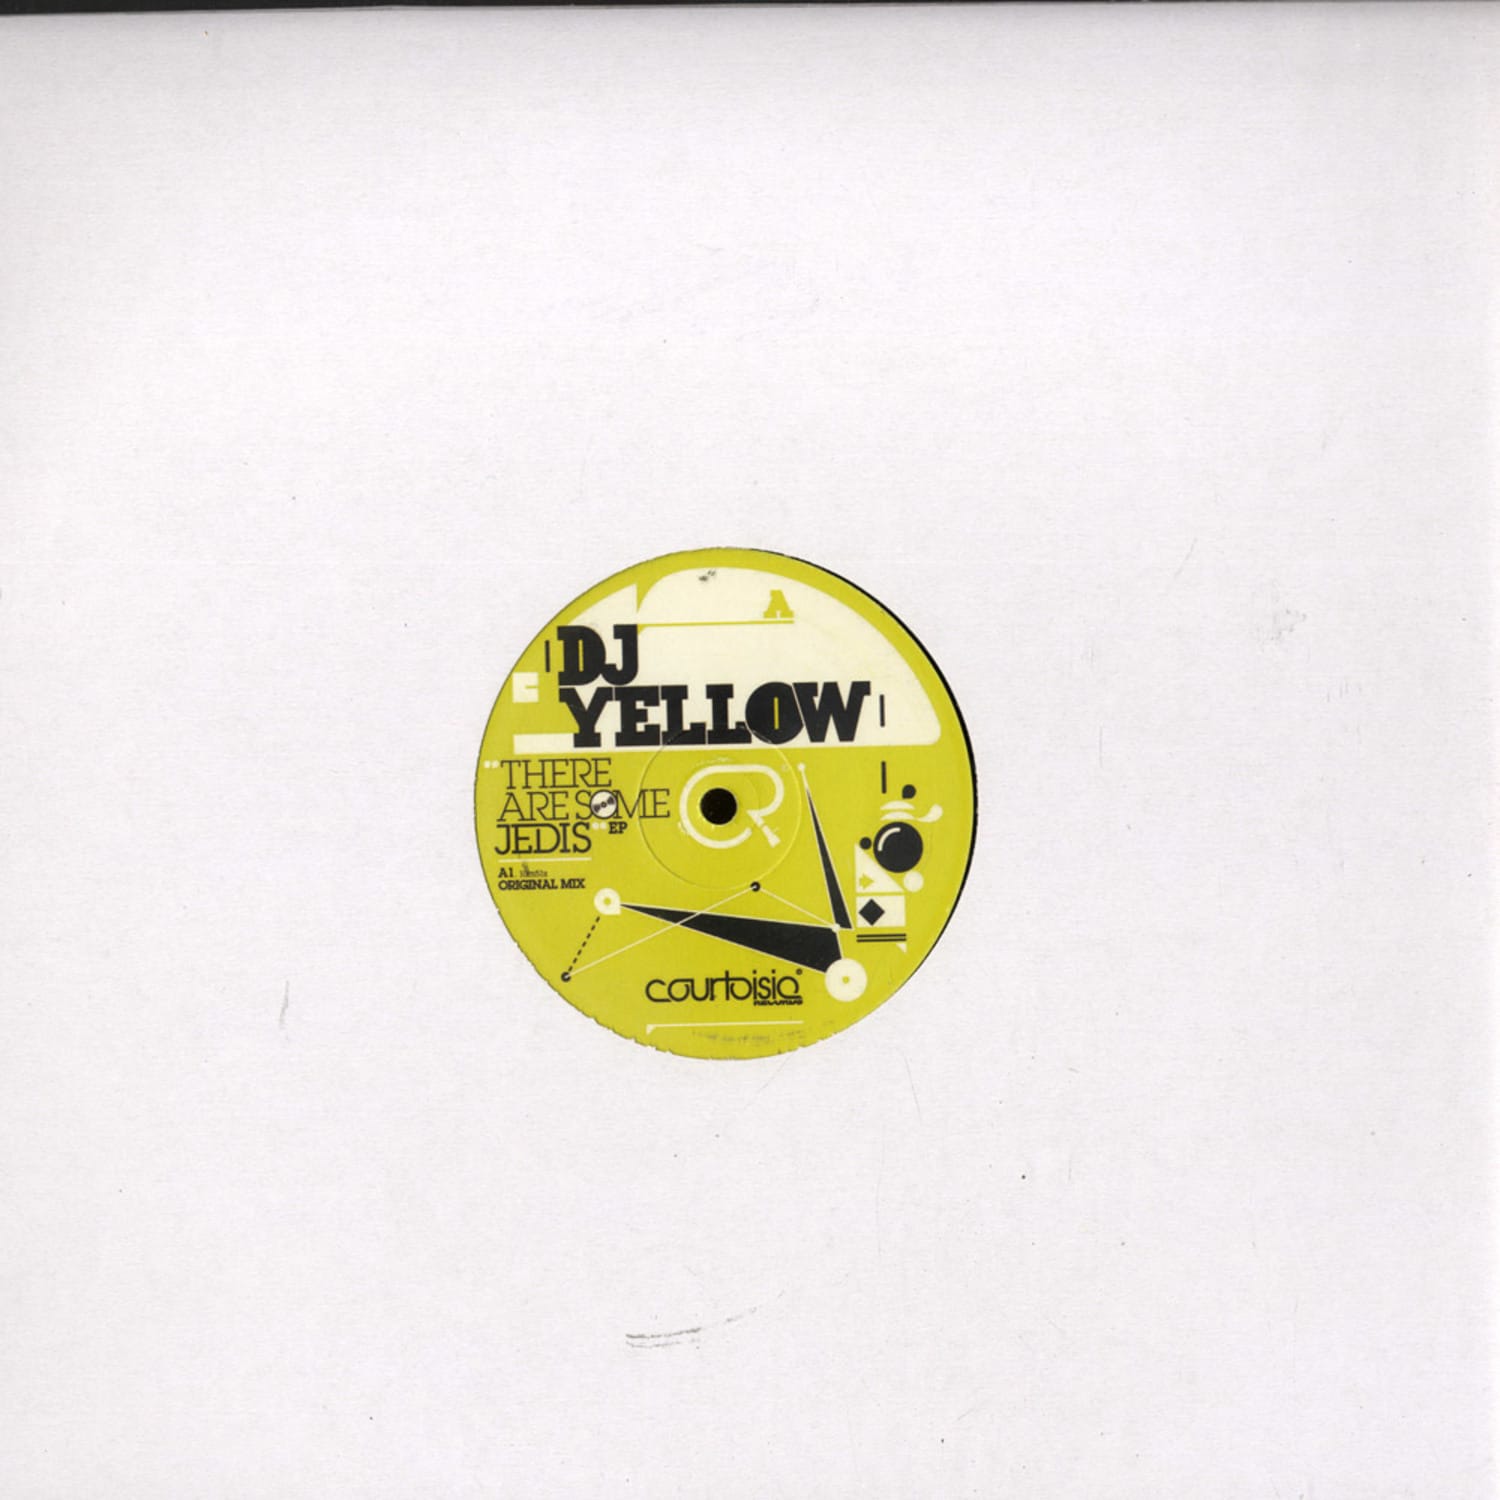 DJ Yellow - THERE ARE SOME JEDIS EP